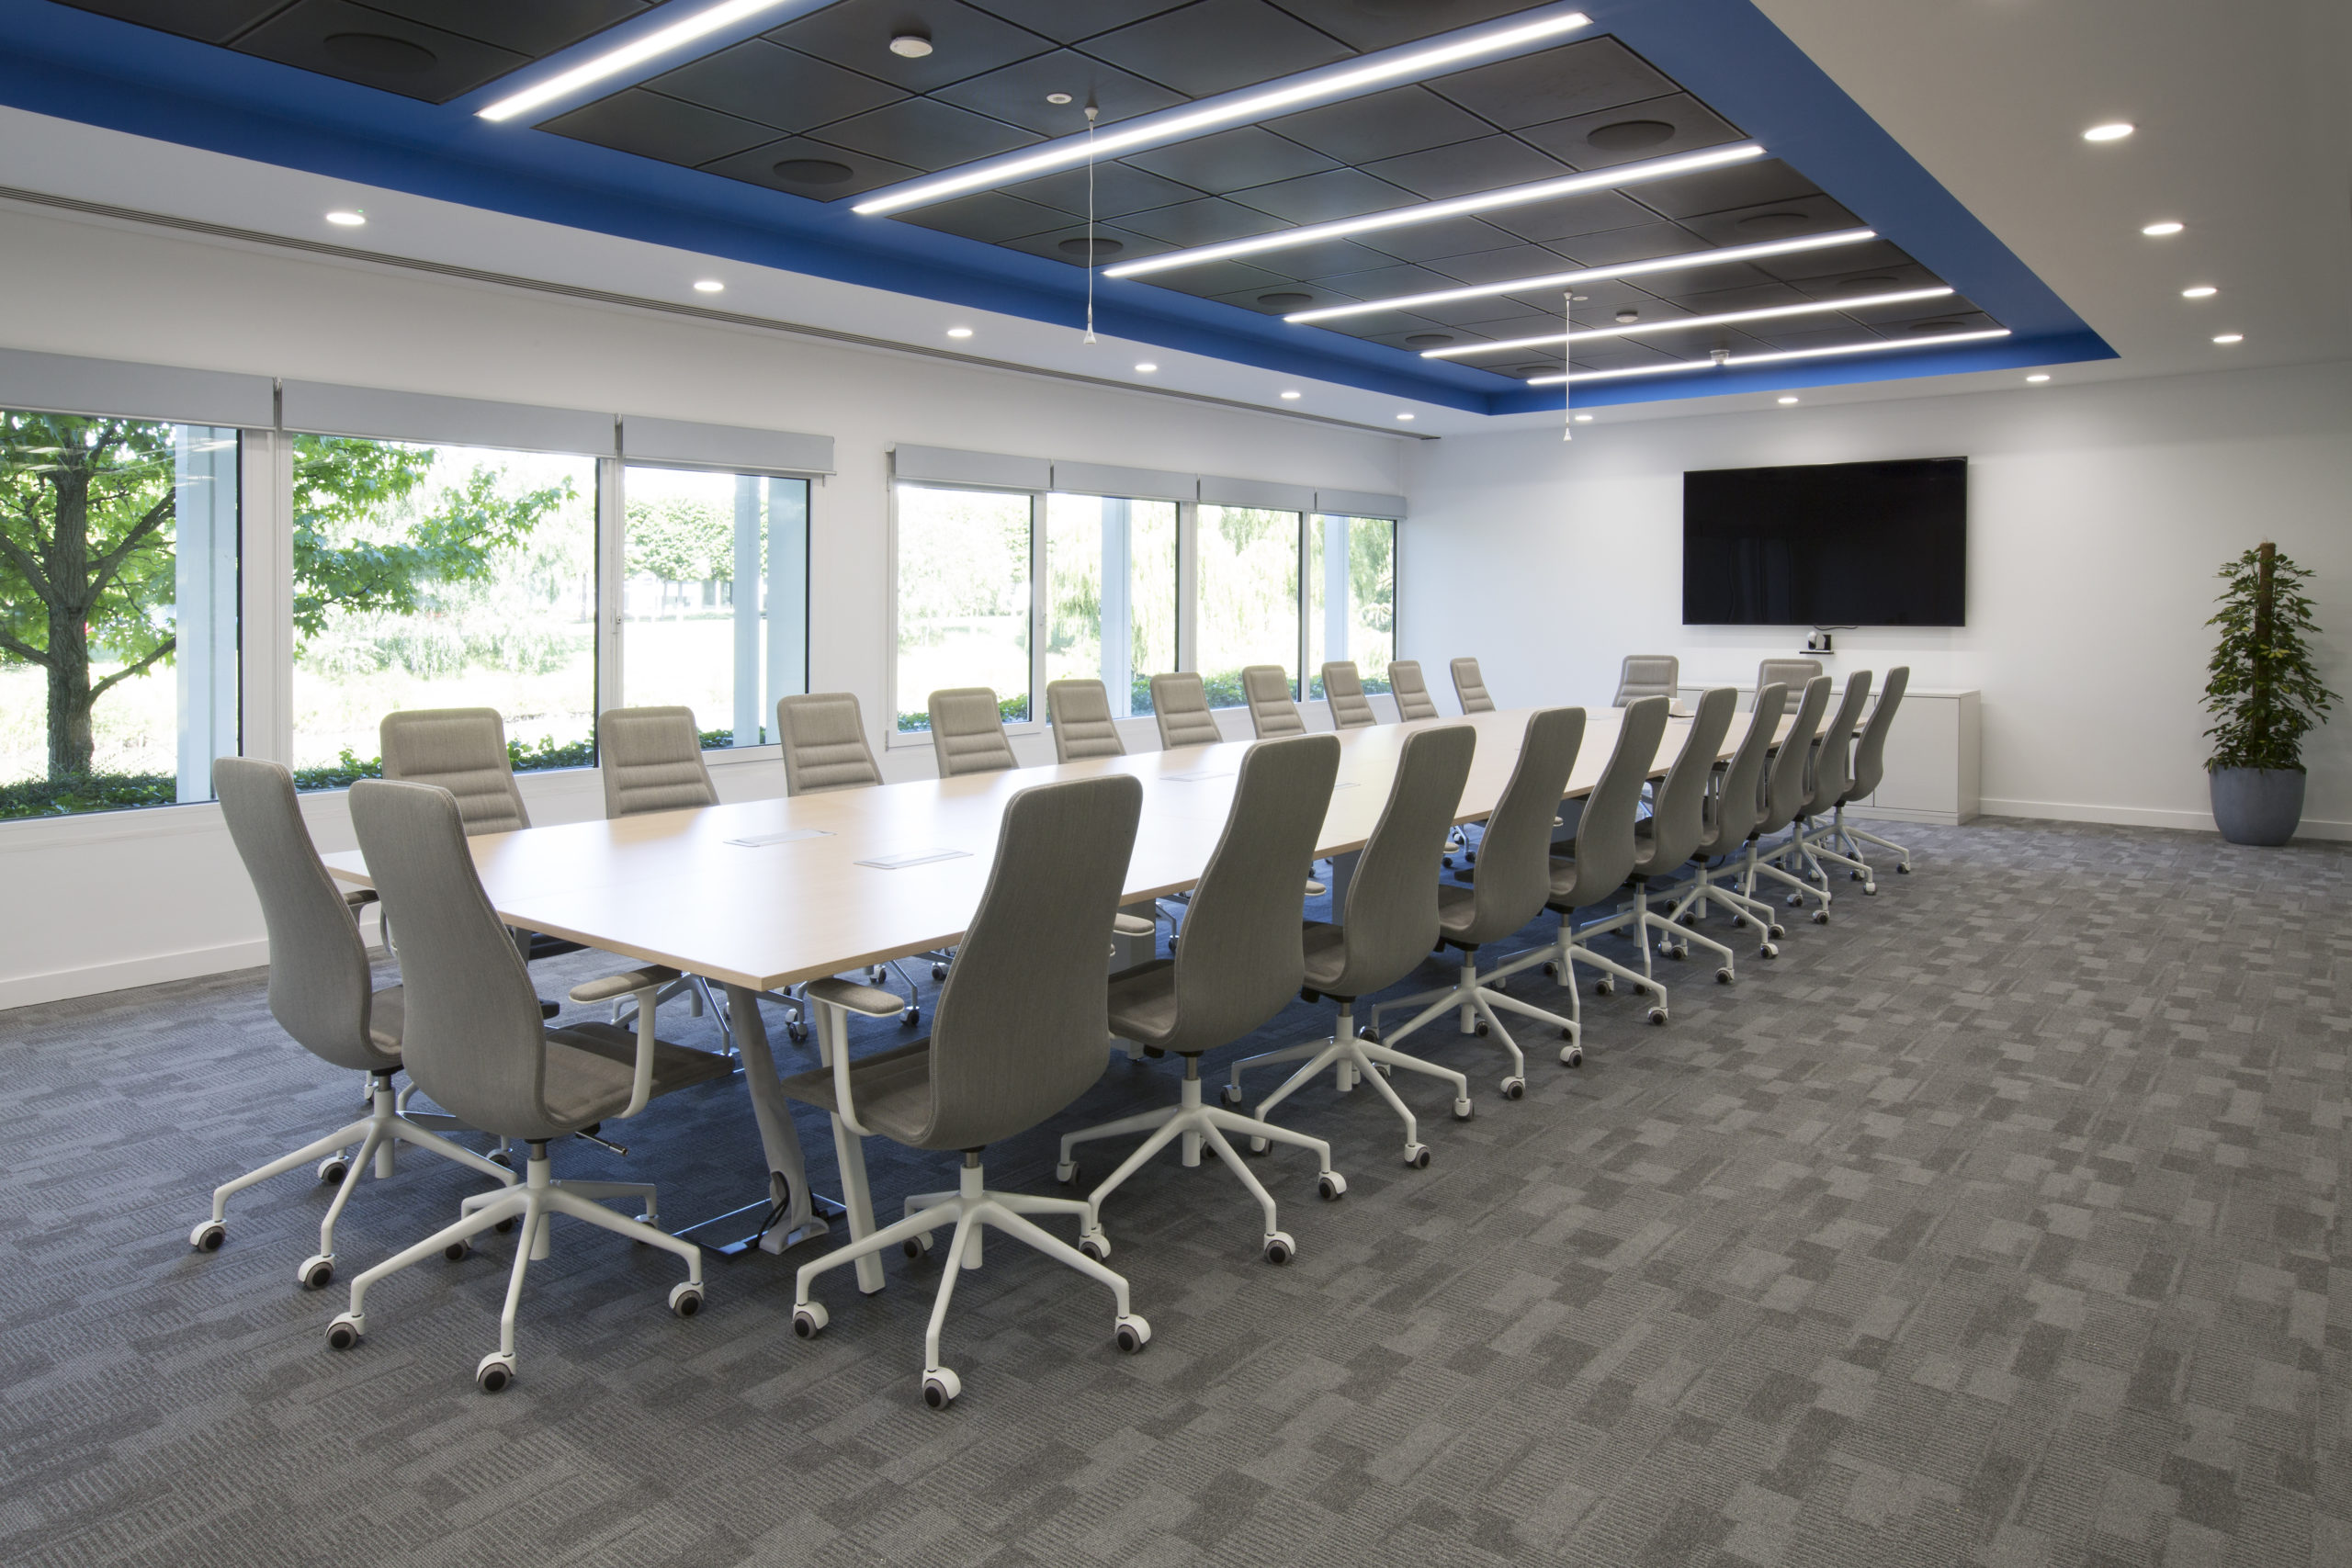 Board room with feature lighting above the long desk at Verifone offices designed by AIS.